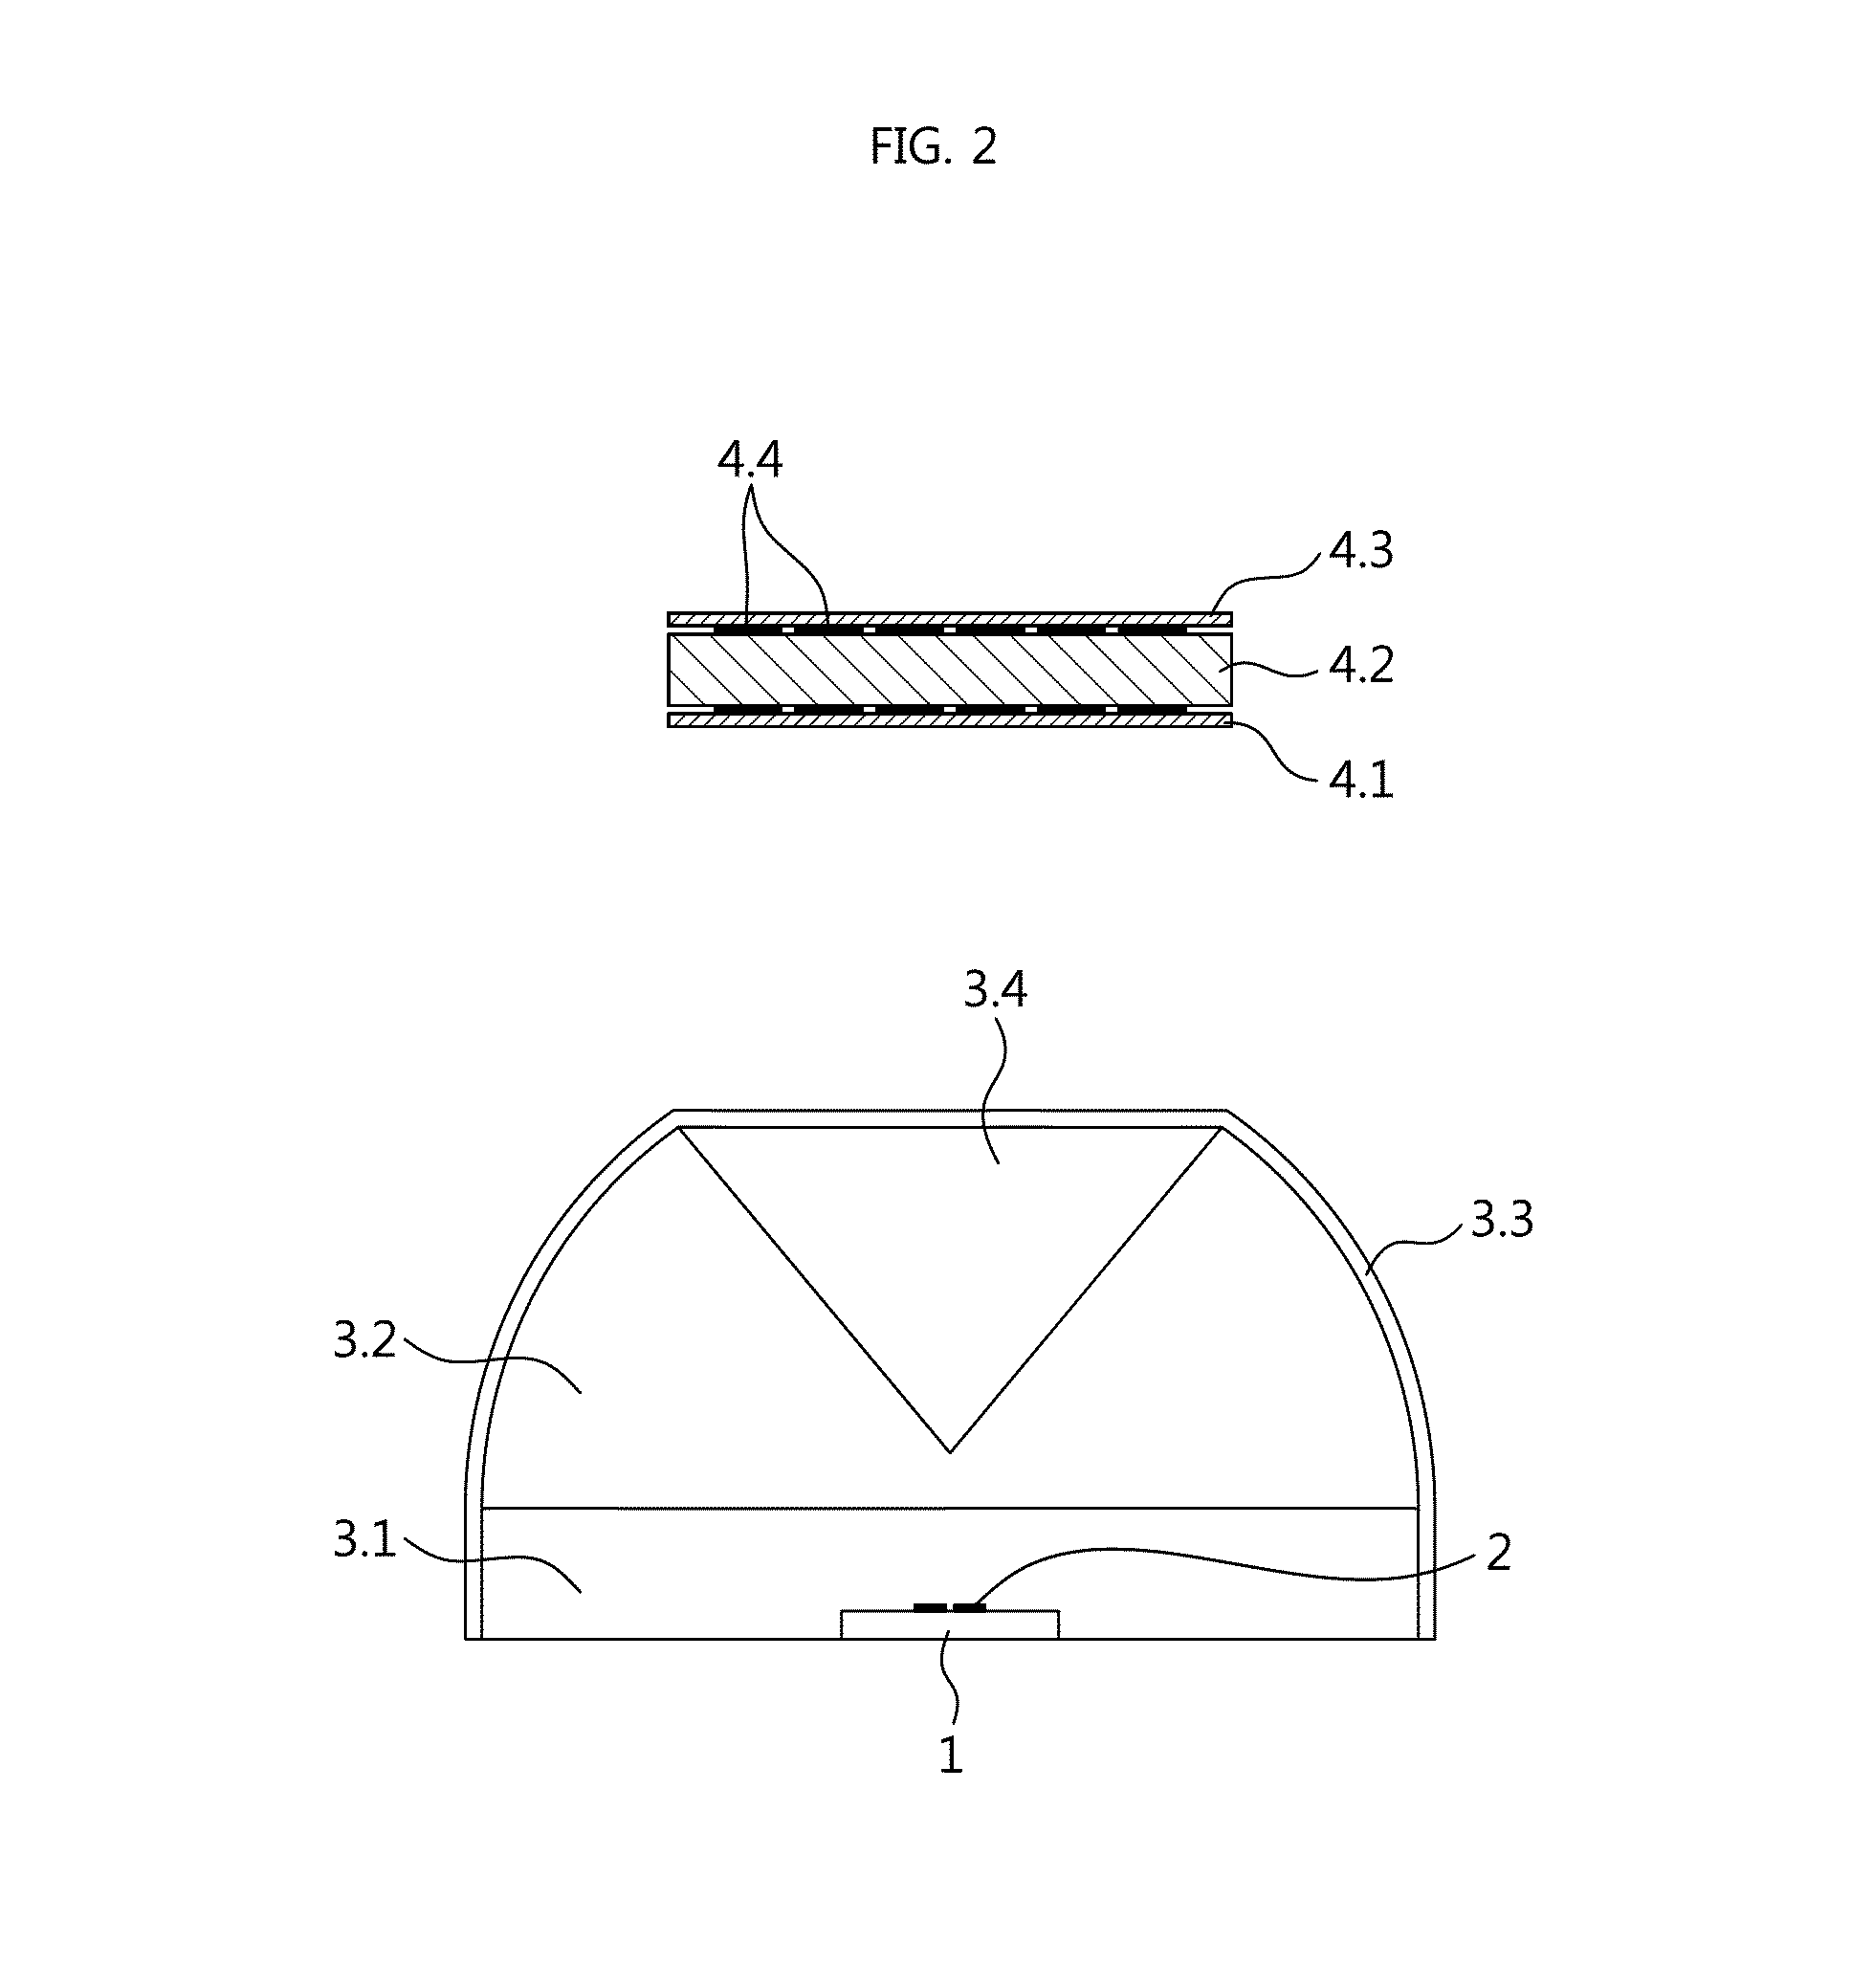 Controlled lens antenna apparatus and system